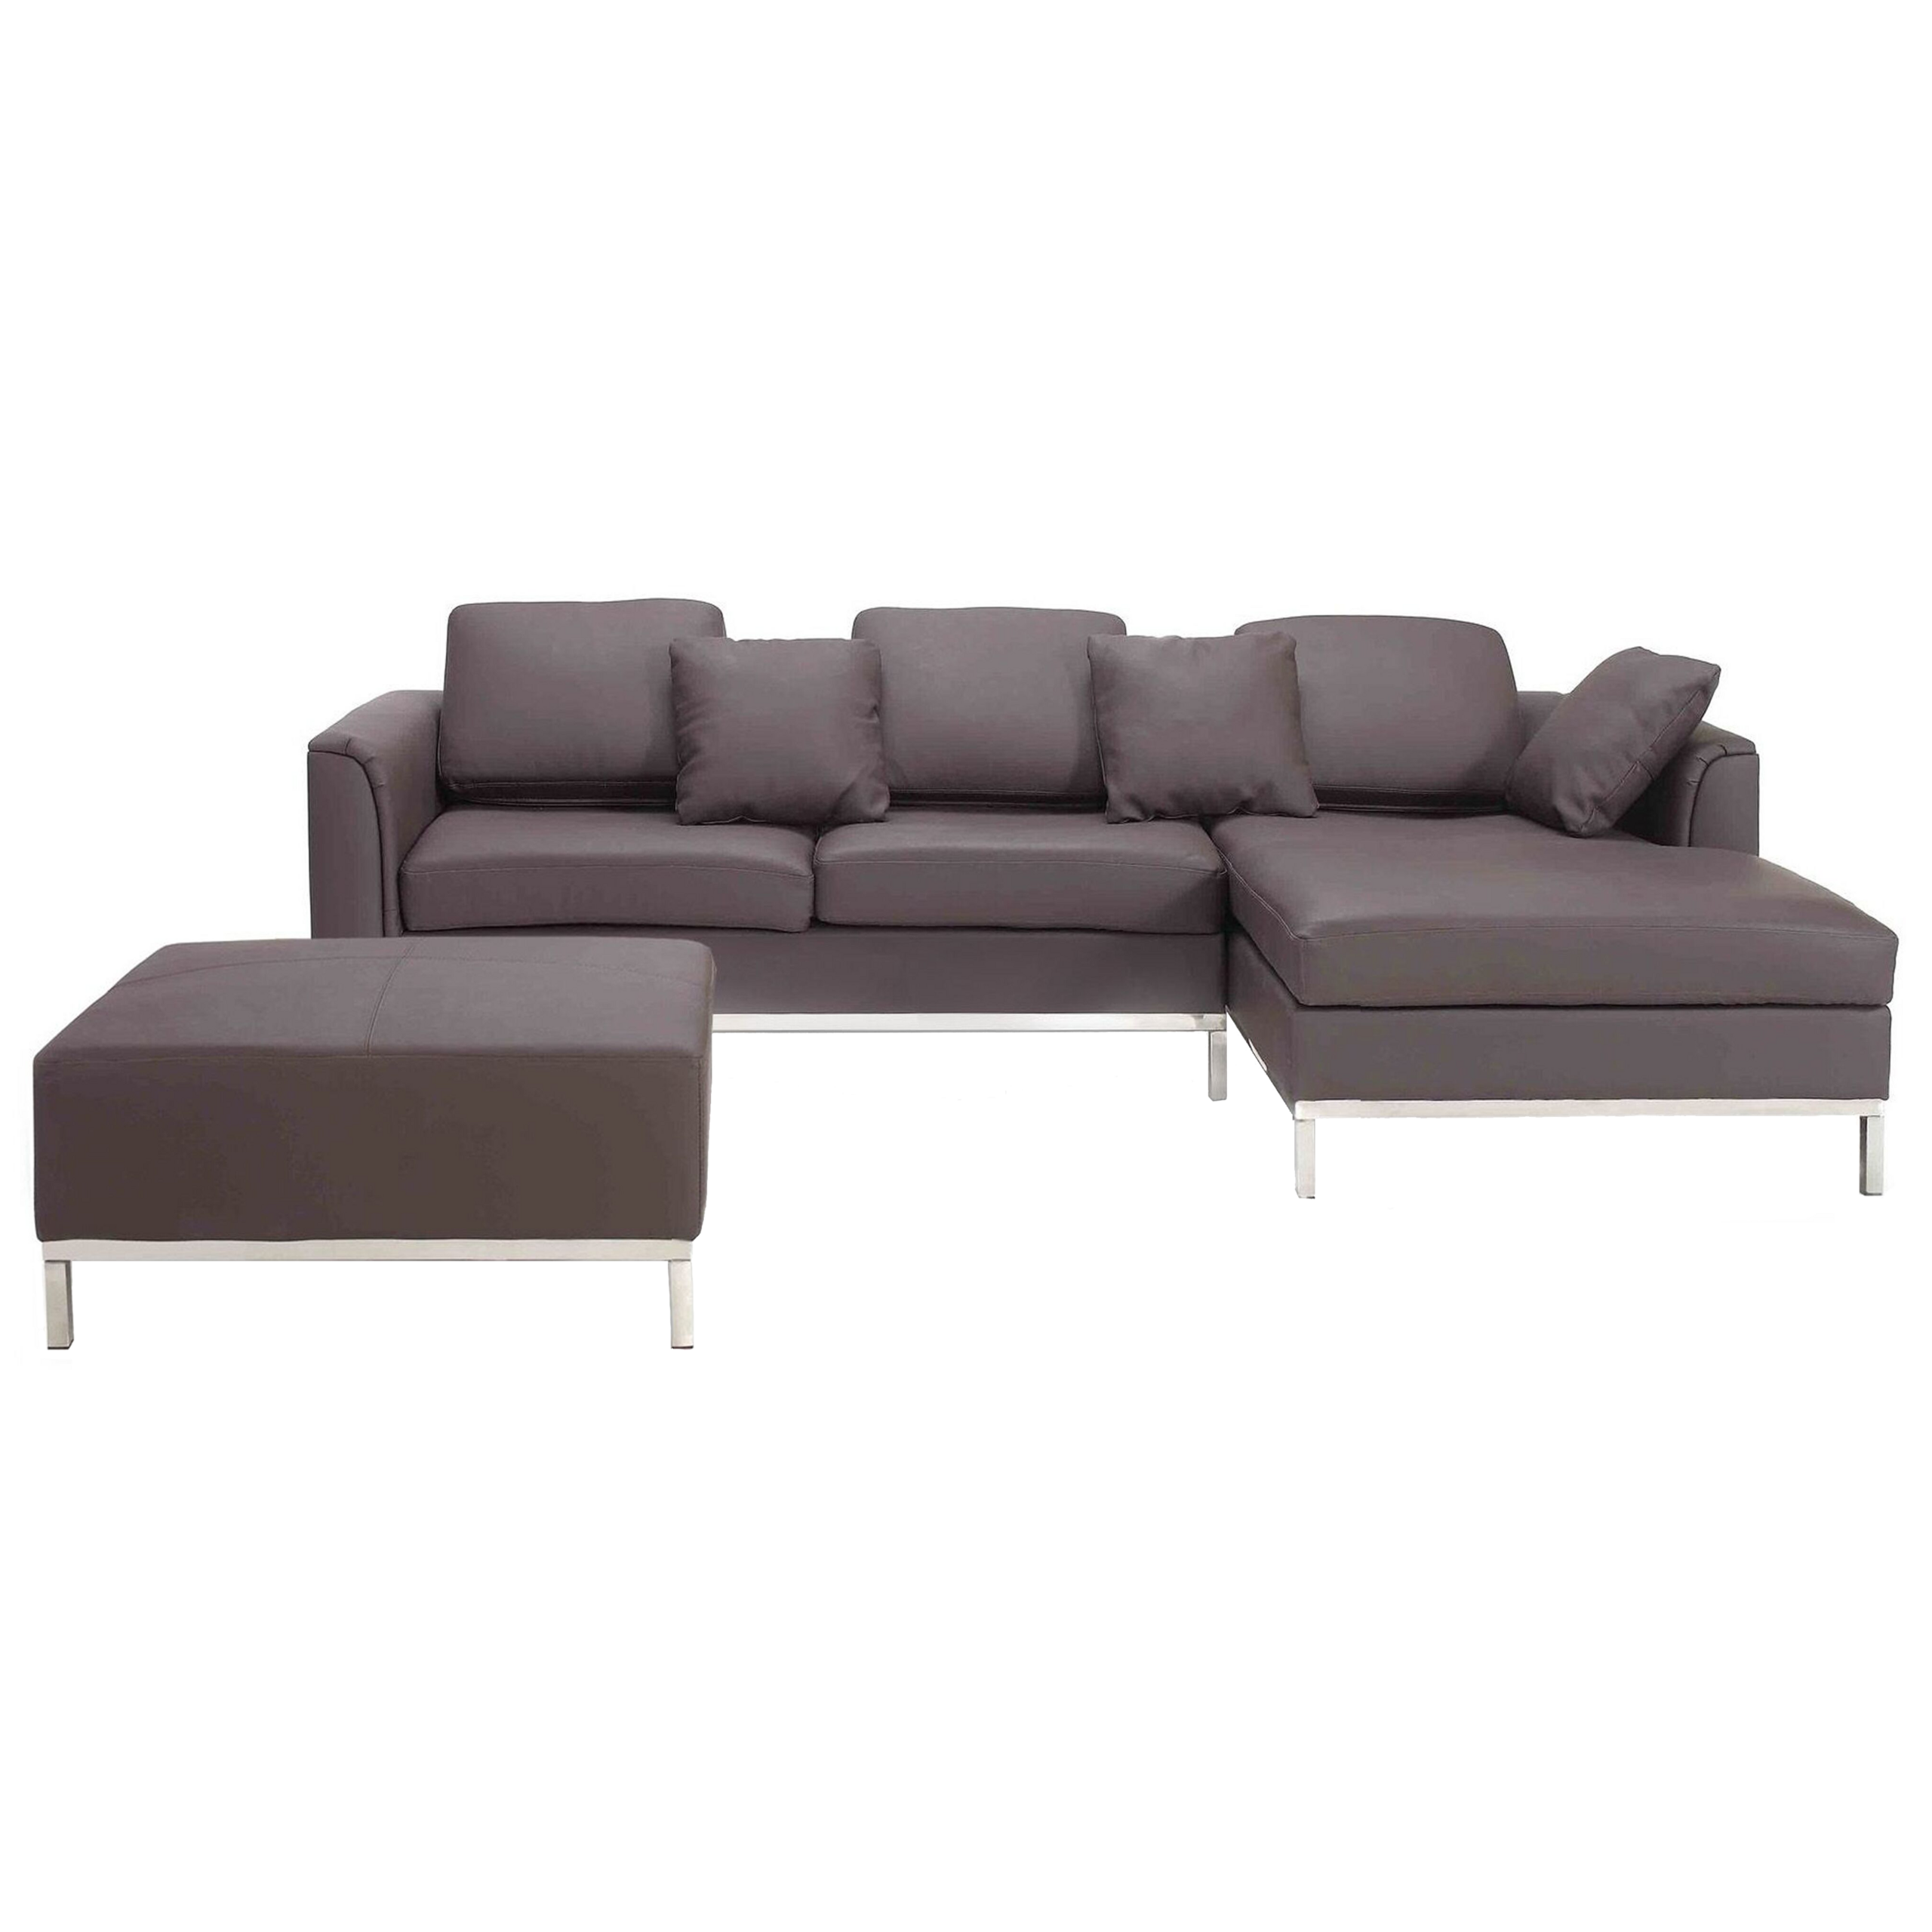 Beliani Corner Sofa Brown Leather Upholstered with Ottoman L-shaped Left Hand Orientation